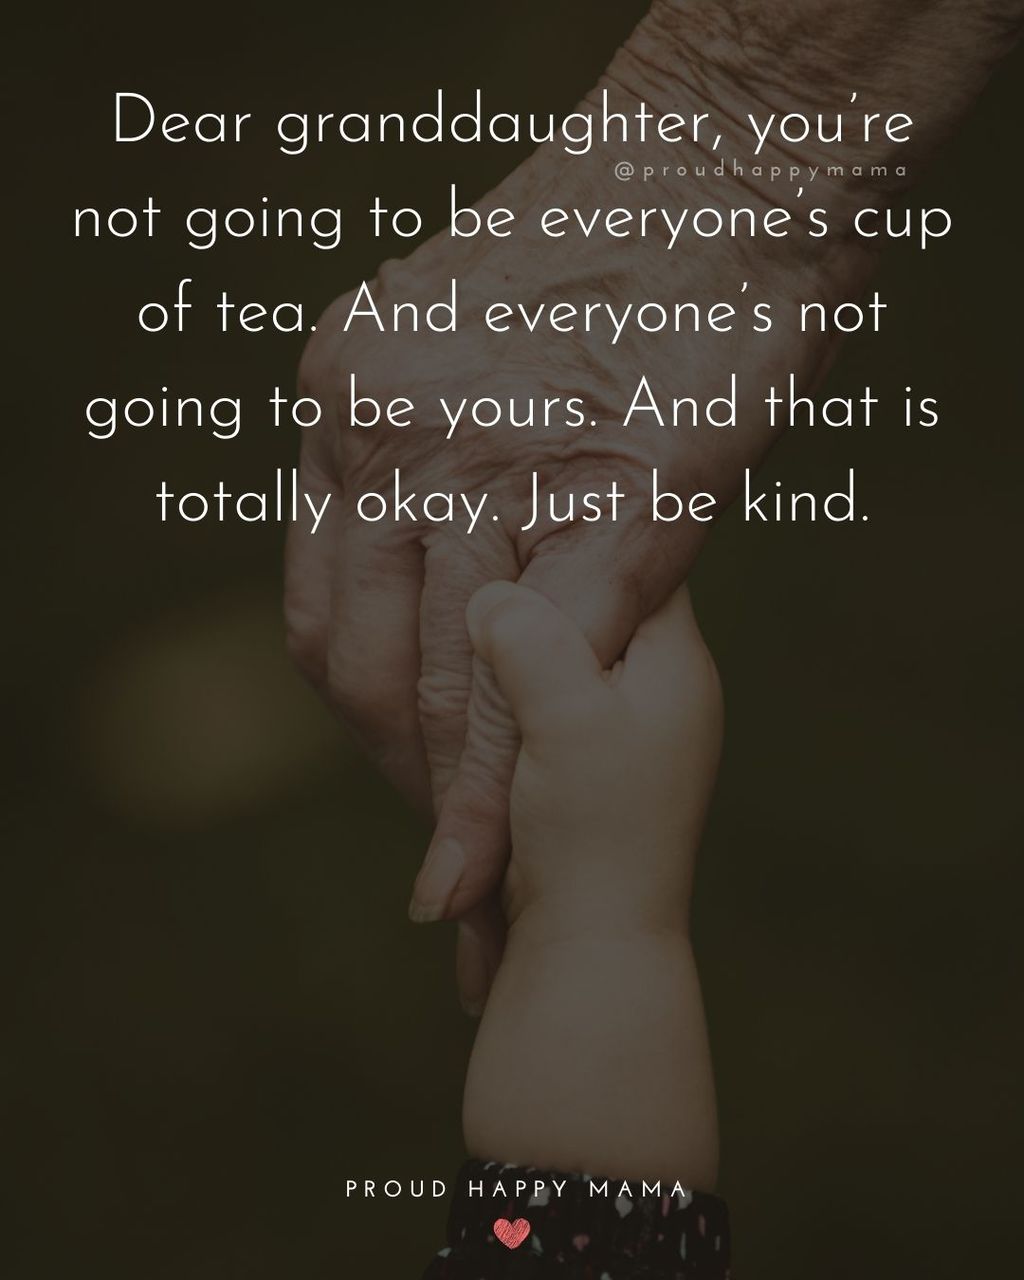 Young granddaughter's hand reaching up and holding onto grandmother's hand with text overlay, ‘Dear granddaughter, you’re not going to be everyone’s cup of tea. And everyone’s not going to be yours. And that is totally okay. Just be kind.’